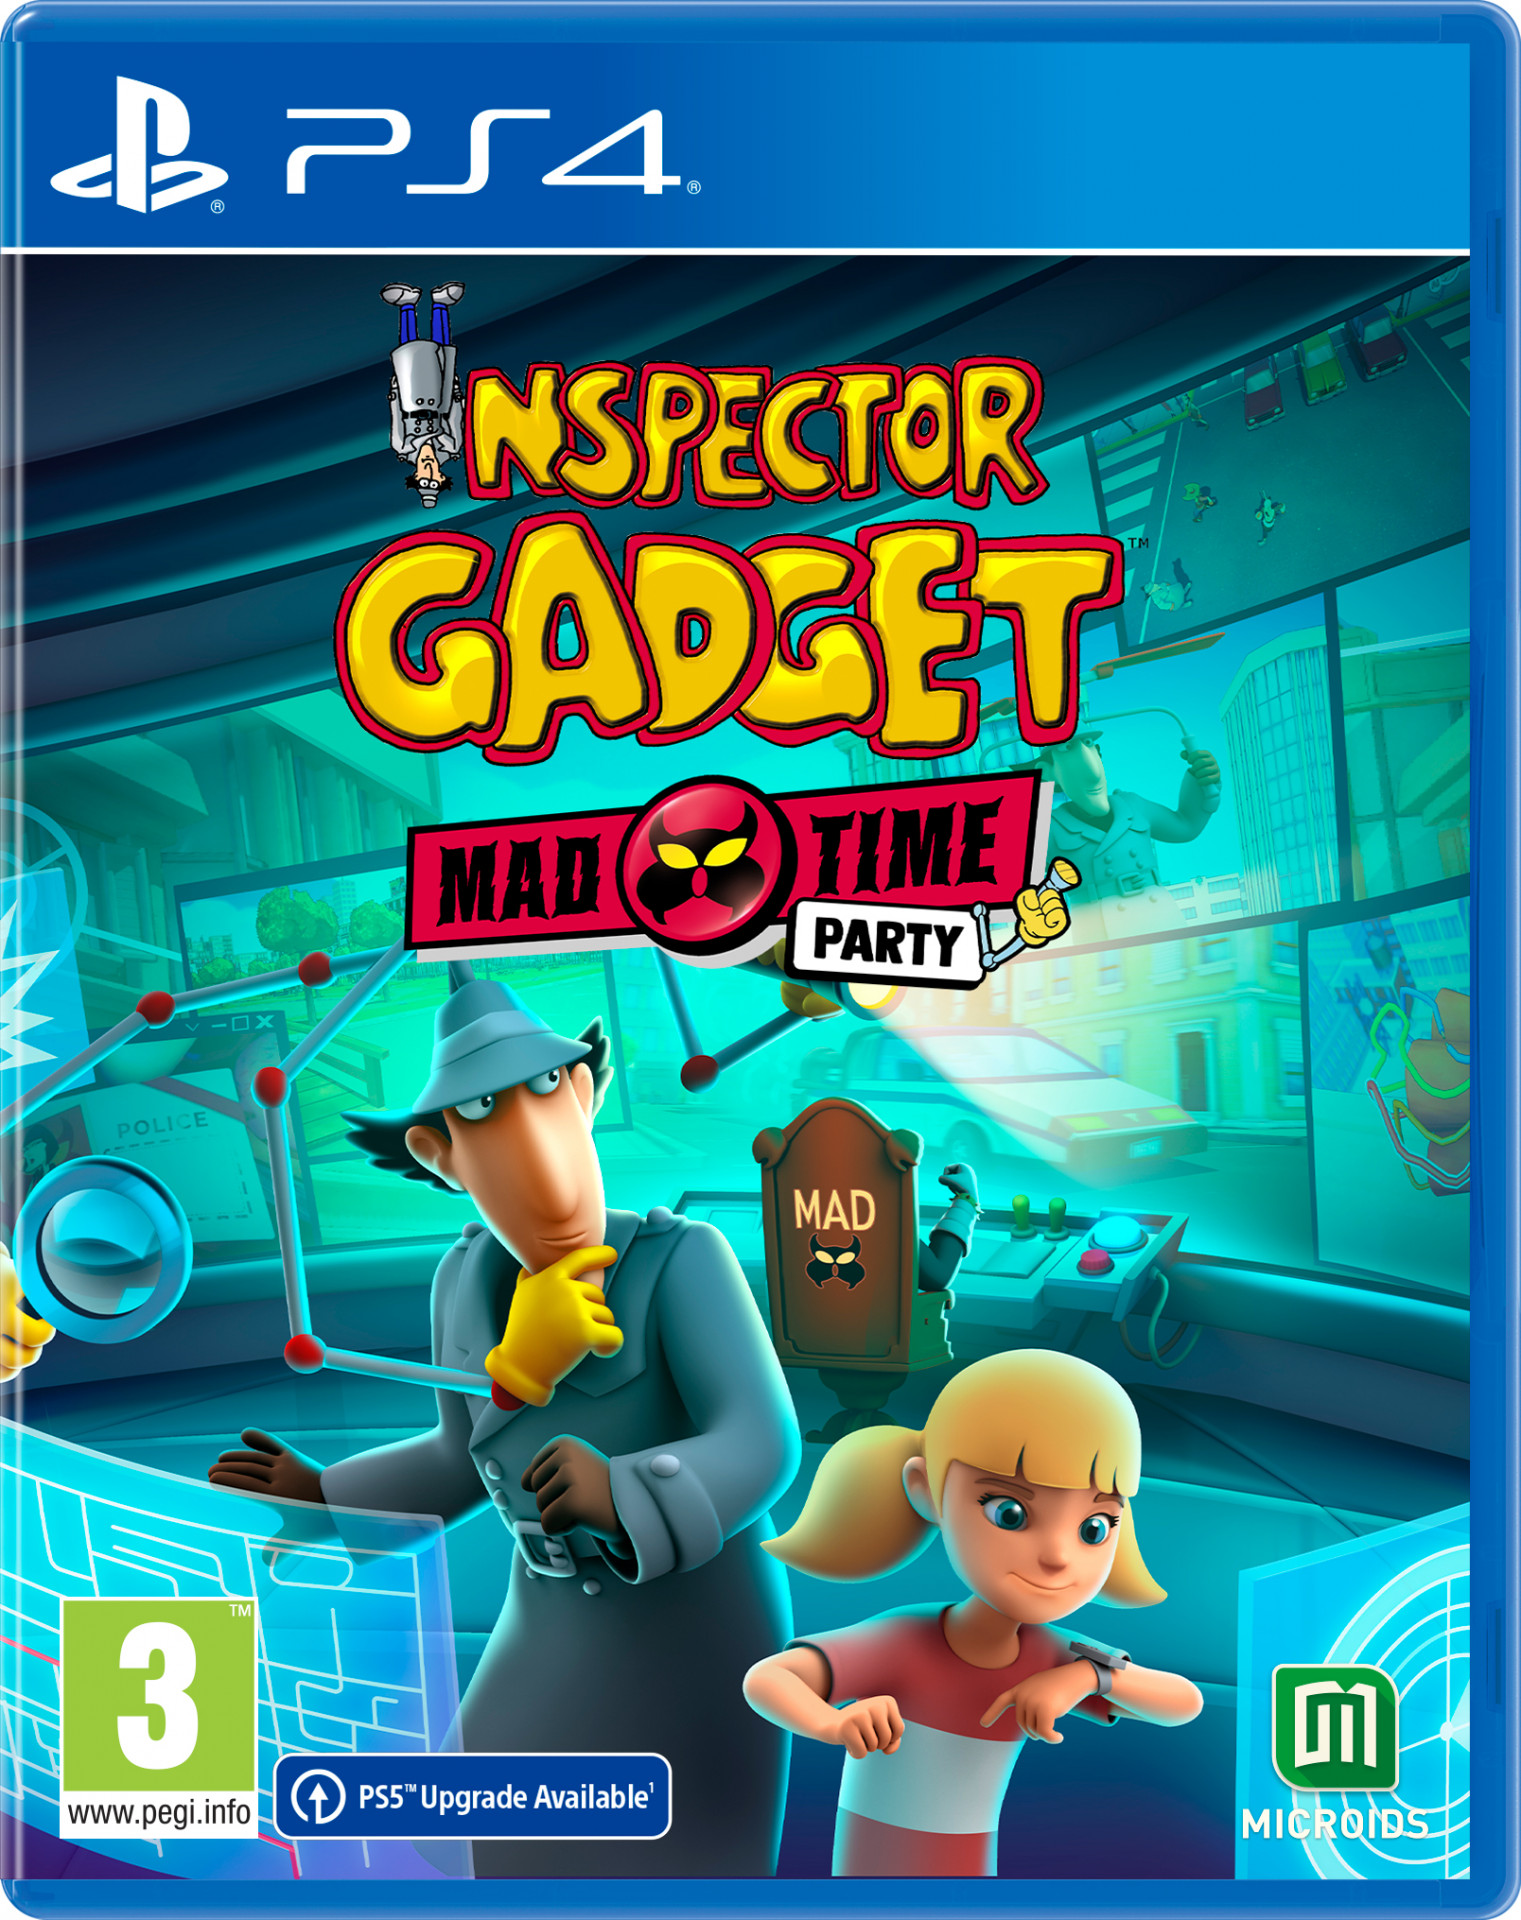 Inspector Gadget: Mad Time Party (PS4), Microids